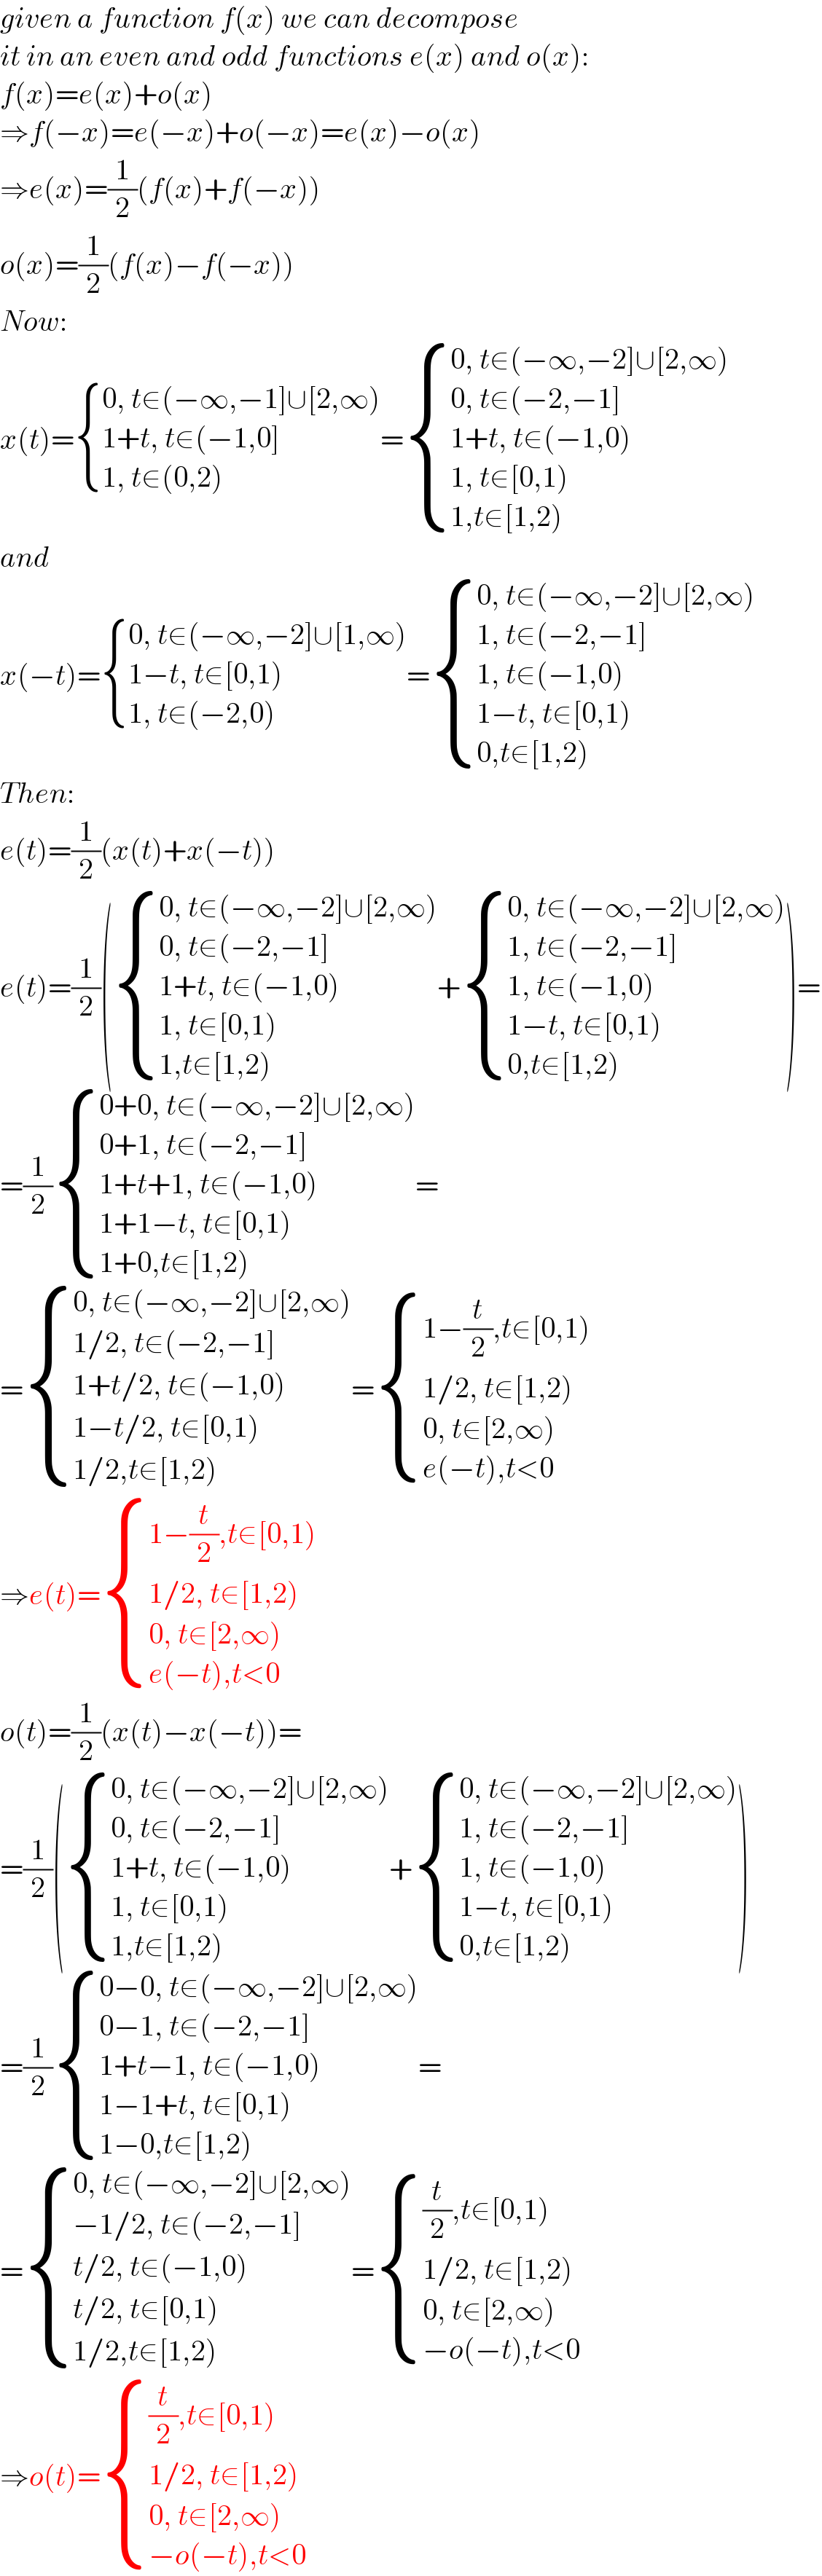 given a function f(x) we can decompose  it in an even and odd functions e(x) and o(x):  f(x)=e(x)+o(x)  ⇒f(−x)=e(−x)+o(−x)=e(x)−o(x)  ⇒e(x)=(1/2)(f(x)+f(−x))  o(x)=(1/2)(f(x)−f(−x))  Now:  x(t)= { ((0, t∈(−∞,−1]∪[2,∞))),((1+t, t∈(−1,0])),((1, t∈(0,2))) :}= { ((0, t∈(−∞,−2]∪[2,∞))),((0, t∈(−2,−1])),((1+t, t∈(−1,0))),((1, t∈[0,1))),((1,t∈[1,2))) :}  and  x(−t)= { ((0, t∈(−∞,−2]∪[1,∞))),((1−t, t∈[0,1))),((1, t∈(−2,0))) :}= { ((0, t∈(−∞,−2]∪[2,∞))),((1, t∈(−2,−1])),((1, t∈(−1,0))),((1−t, t∈[0,1))),((0,t∈[1,2))) :}  Then:  e(t)=(1/2)(x(t)+x(−t))  e(t)=(1/2)( { ((0, t∈(−∞,−2]∪[2,∞))),((0, t∈(−2,−1])),((1+t, t∈(−1,0))),((1, t∈[0,1))),((1,t∈[1,2))) :}+ { ((0, t∈(−∞,−2]∪[2,∞))),((1, t∈(−2,−1])),((1, t∈(−1,0))),((1−t, t∈[0,1))),((0,t∈[1,2))) :})=  =(1/2) { ((0+0, t∈(−∞,−2]∪[2,∞))),((0+1, t∈(−2,−1])),((1+t+1, t∈(−1,0))),((1+1−t, t∈[0,1))),((1+0,t∈[1,2))) :}=  = { ((0, t∈(−∞,−2]∪[2,∞))),((1/2, t∈(−2,−1])),((1+t/2, t∈(−1,0))),((1−t/2, t∈[0,1))),((1/2,t∈[1,2))) :}= { ((1−(t/2),t∈[0,1))),((1/2, t∈[1,2))),((0, t∈[2,∞))),((e(−t),t<0)) :}  ⇒e(t)= { ((1−(t/2),t∈[0,1))),((1/2, t∈[1,2))),((0, t∈[2,∞))),((e(−t),t<0)) :}  o(t)=(1/2)(x(t)−x(−t))=  =(1/2)( { ((0, t∈(−∞,−2]∪[2,∞))),((0, t∈(−2,−1])),((1+t, t∈(−1,0))),((1, t∈[0,1))),((1,t∈[1,2))) :}+ { ((0, t∈(−∞,−2]∪[2,∞))),((1, t∈(−2,−1])),((1, t∈(−1,0))),((1−t, t∈[0,1))),((0,t∈[1,2))) :})  =(1/2) { ((0−0, t∈(−∞,−2]∪[2,∞))),((0−1, t∈(−2,−1])),((1+t−1, t∈(−1,0))),((1−1+t, t∈[0,1))),((1−0,t∈[1,2))) :}=  = { ((0, t∈(−∞,−2]∪[2,∞))),((−1/2, t∈(−2,−1])),((t/2, t∈(−1,0))),((t/2, t∈[0,1))),((1/2,t∈[1,2))) :}= { (((t/2),t∈[0,1))),((1/2, t∈[1,2))),((0, t∈[2,∞))),((−o(−t),t<0)) :}  ⇒o(t)= { (((t/2),t∈[0,1))),((1/2, t∈[1,2))),((0, t∈[2,∞))),((−o(−t),t<0)) :}  